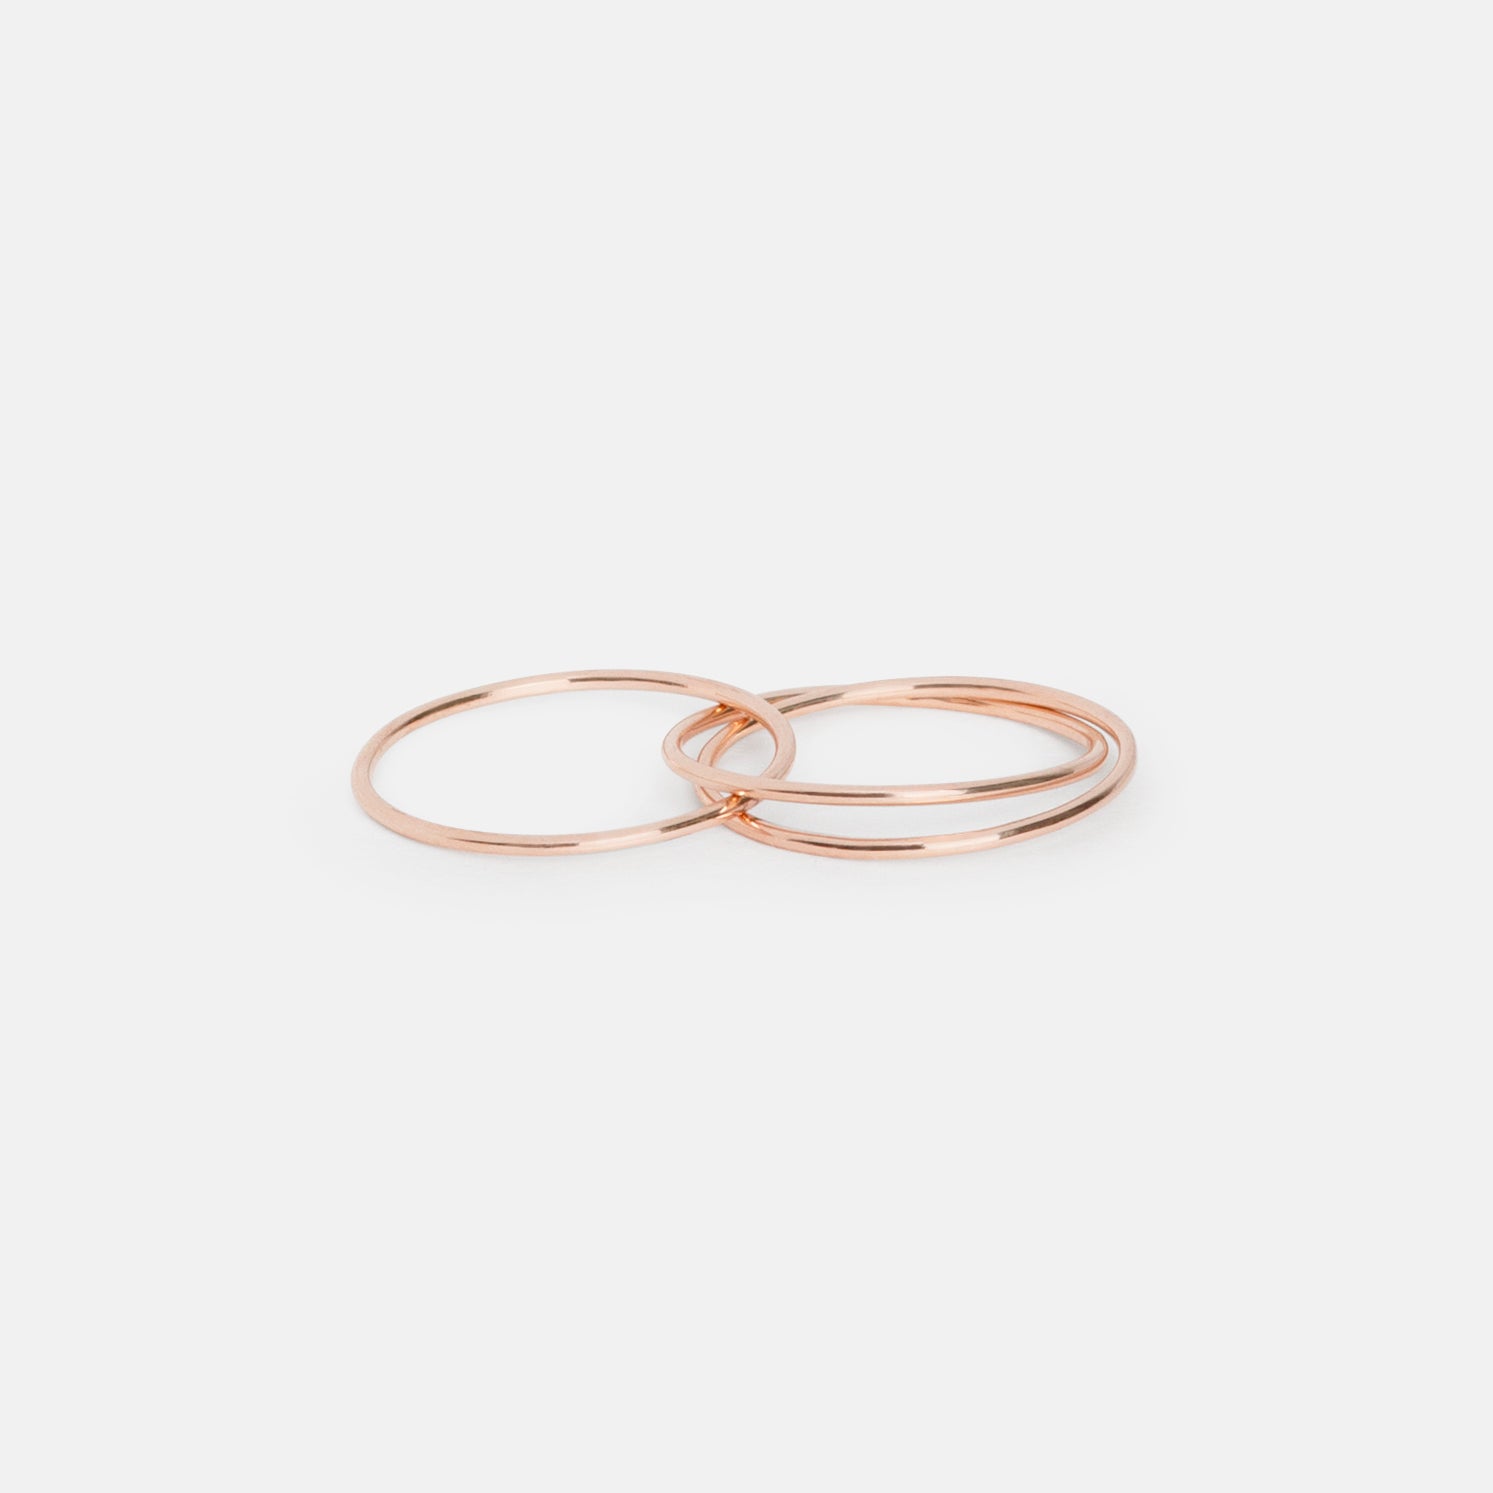  Link Stacked Ring in 14k Rose Gold by SHW Fine Jewelry